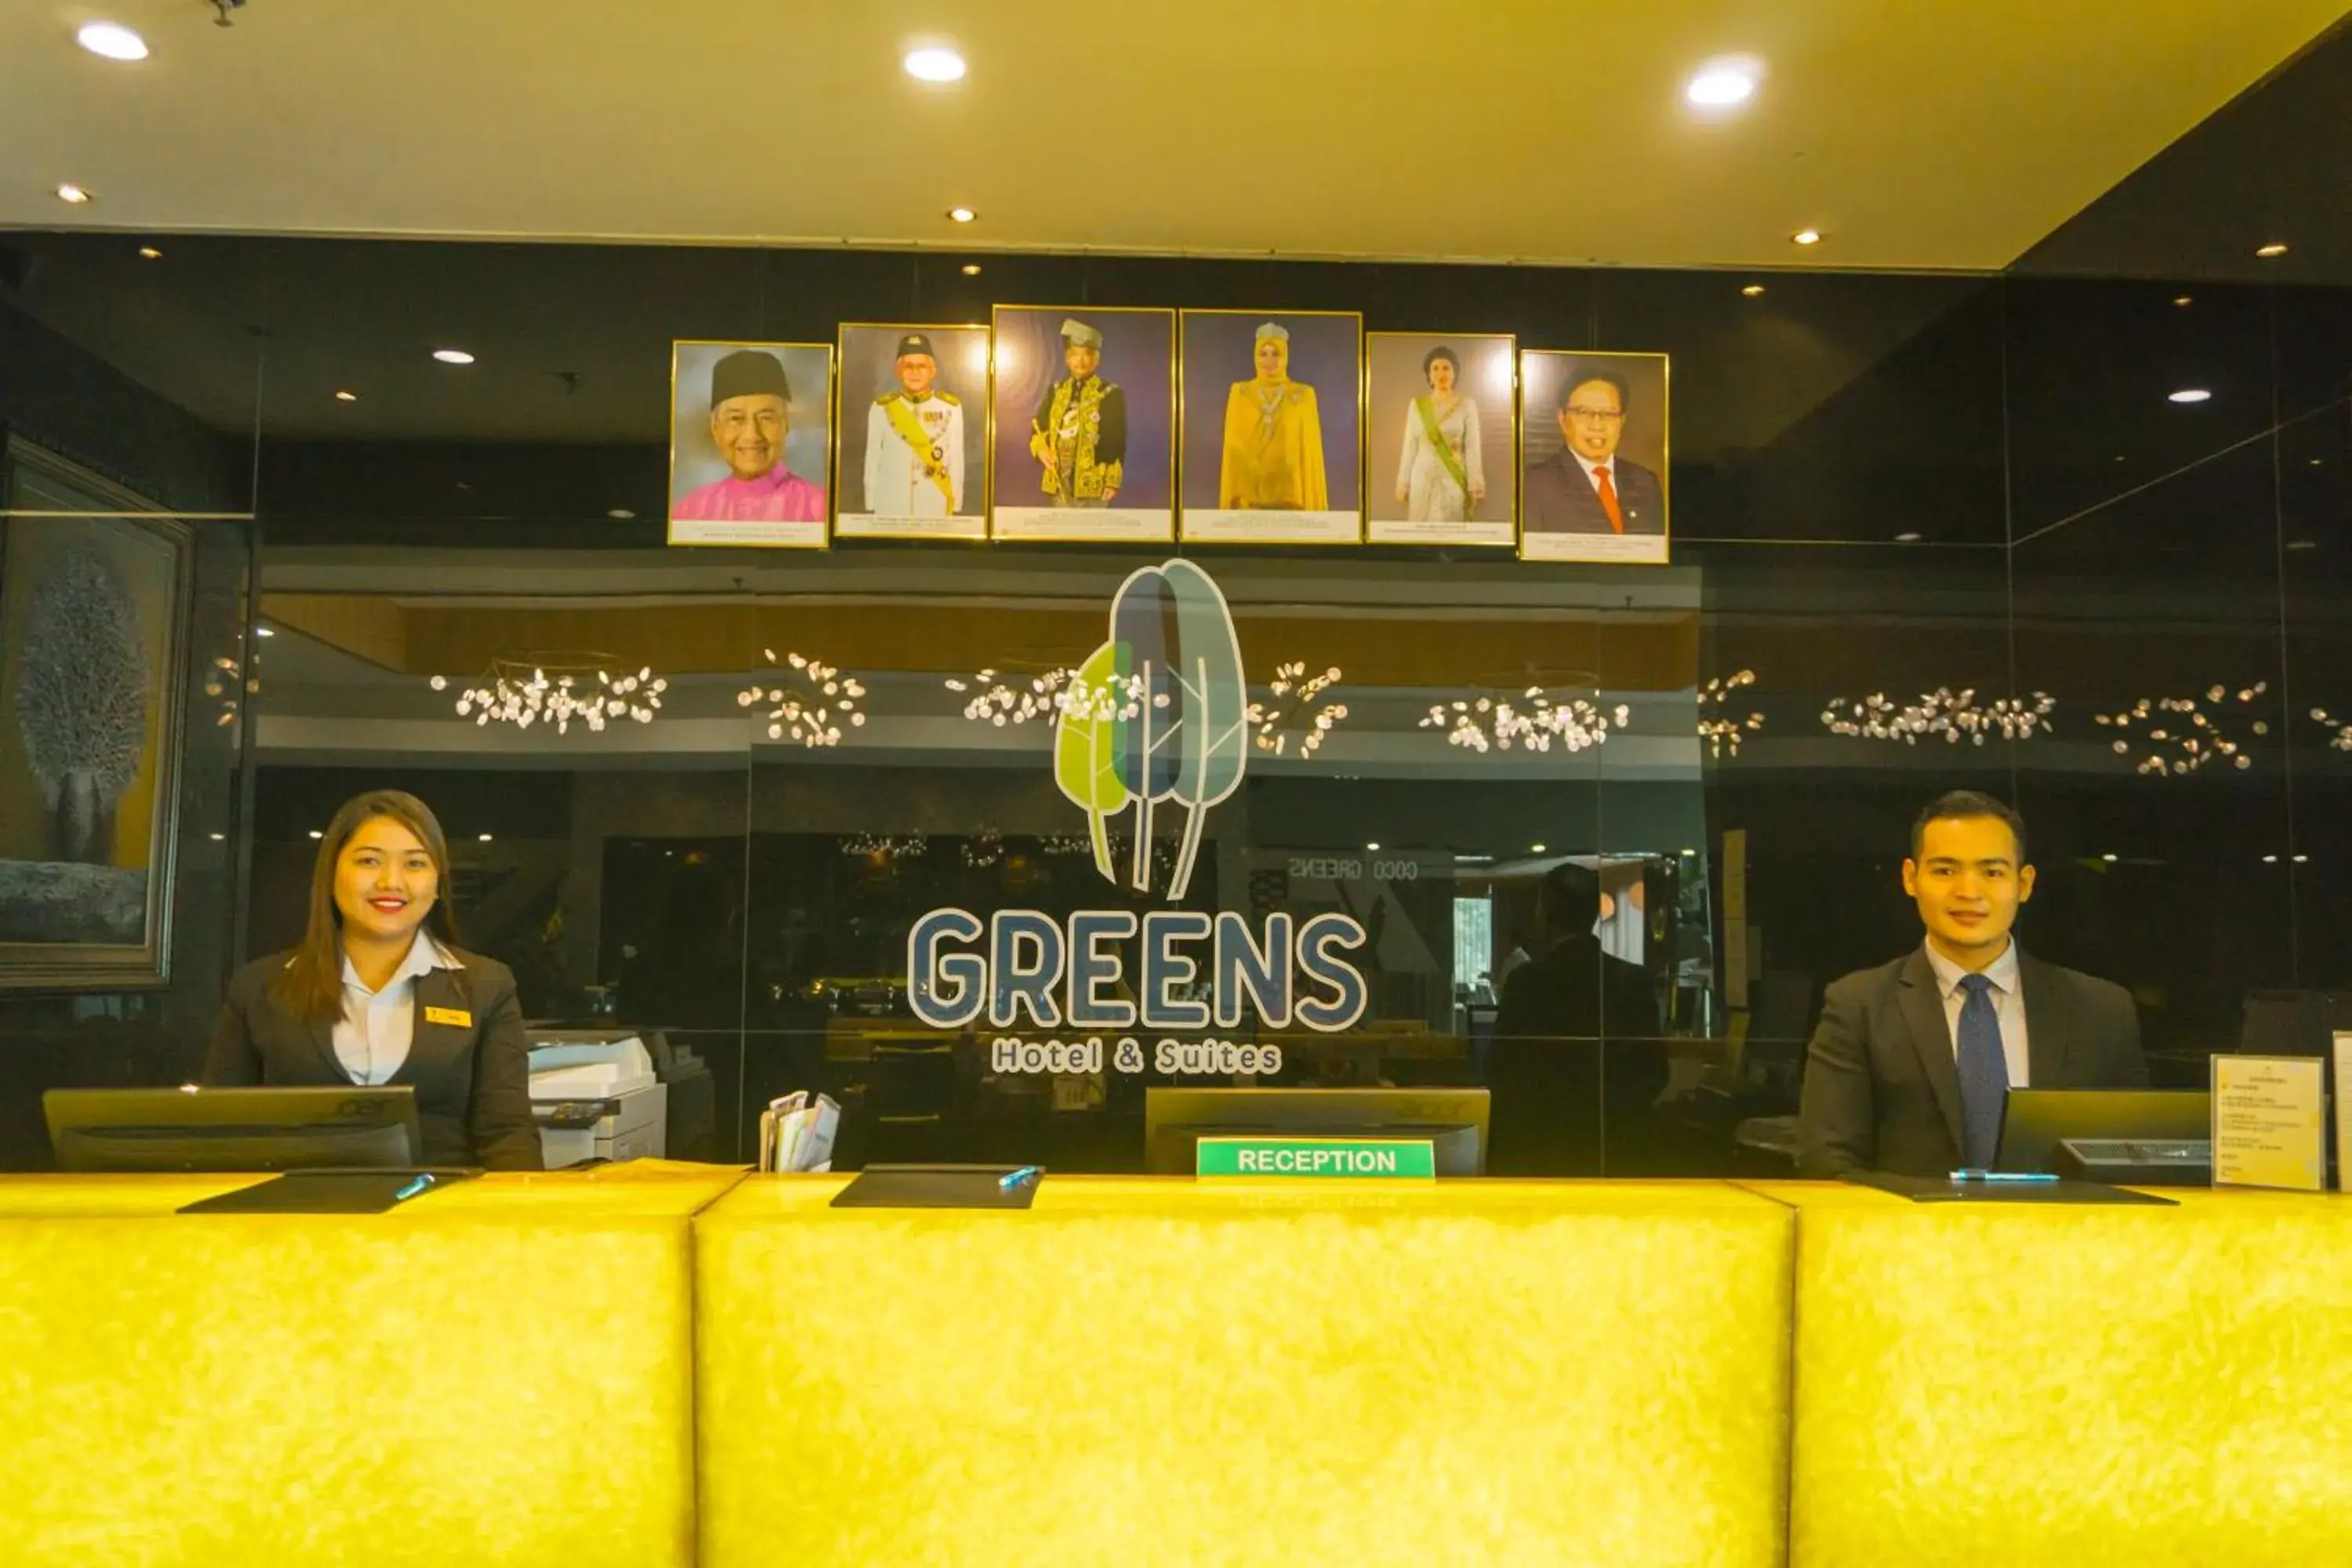 Lobby or reception in Greens Hotel & Suites